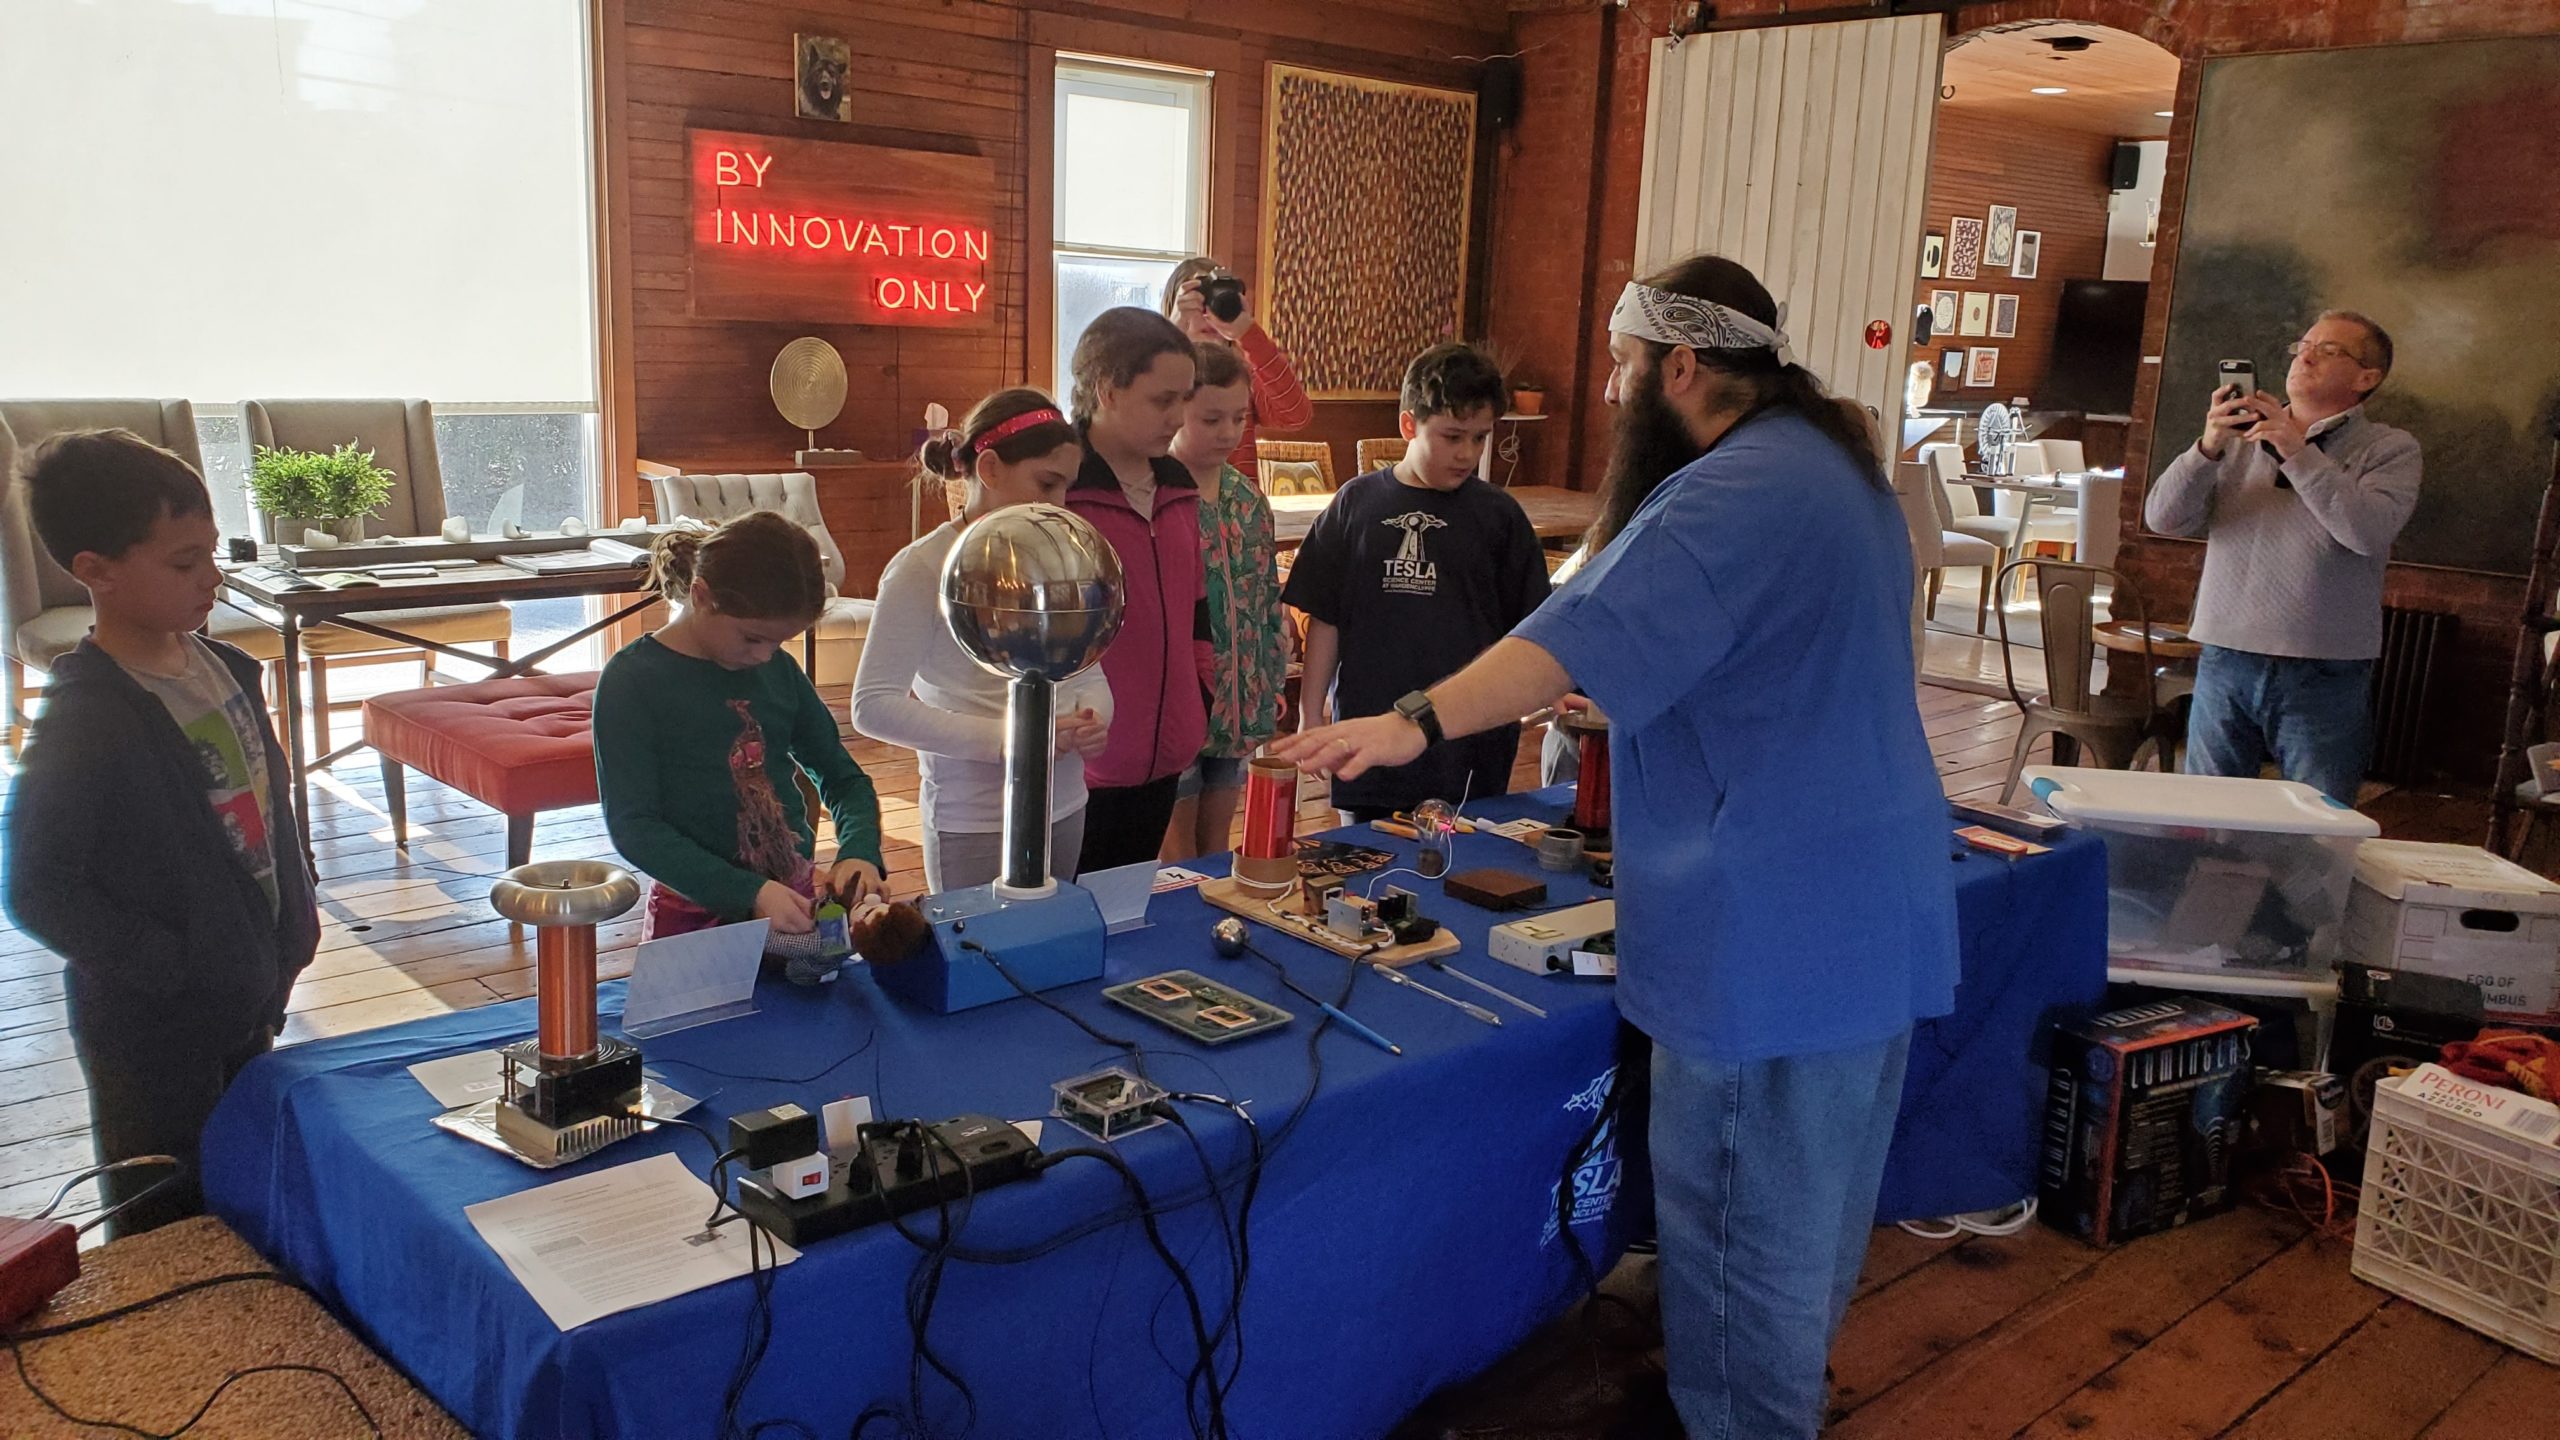 The Spur's 2020 i-kids program, in partnership with the Tesla Science Center got started last week. Participants learned about Nikola Tesla, his electrical inventions and played with the Van De Graaff generator. The session also included making an electric motor. 